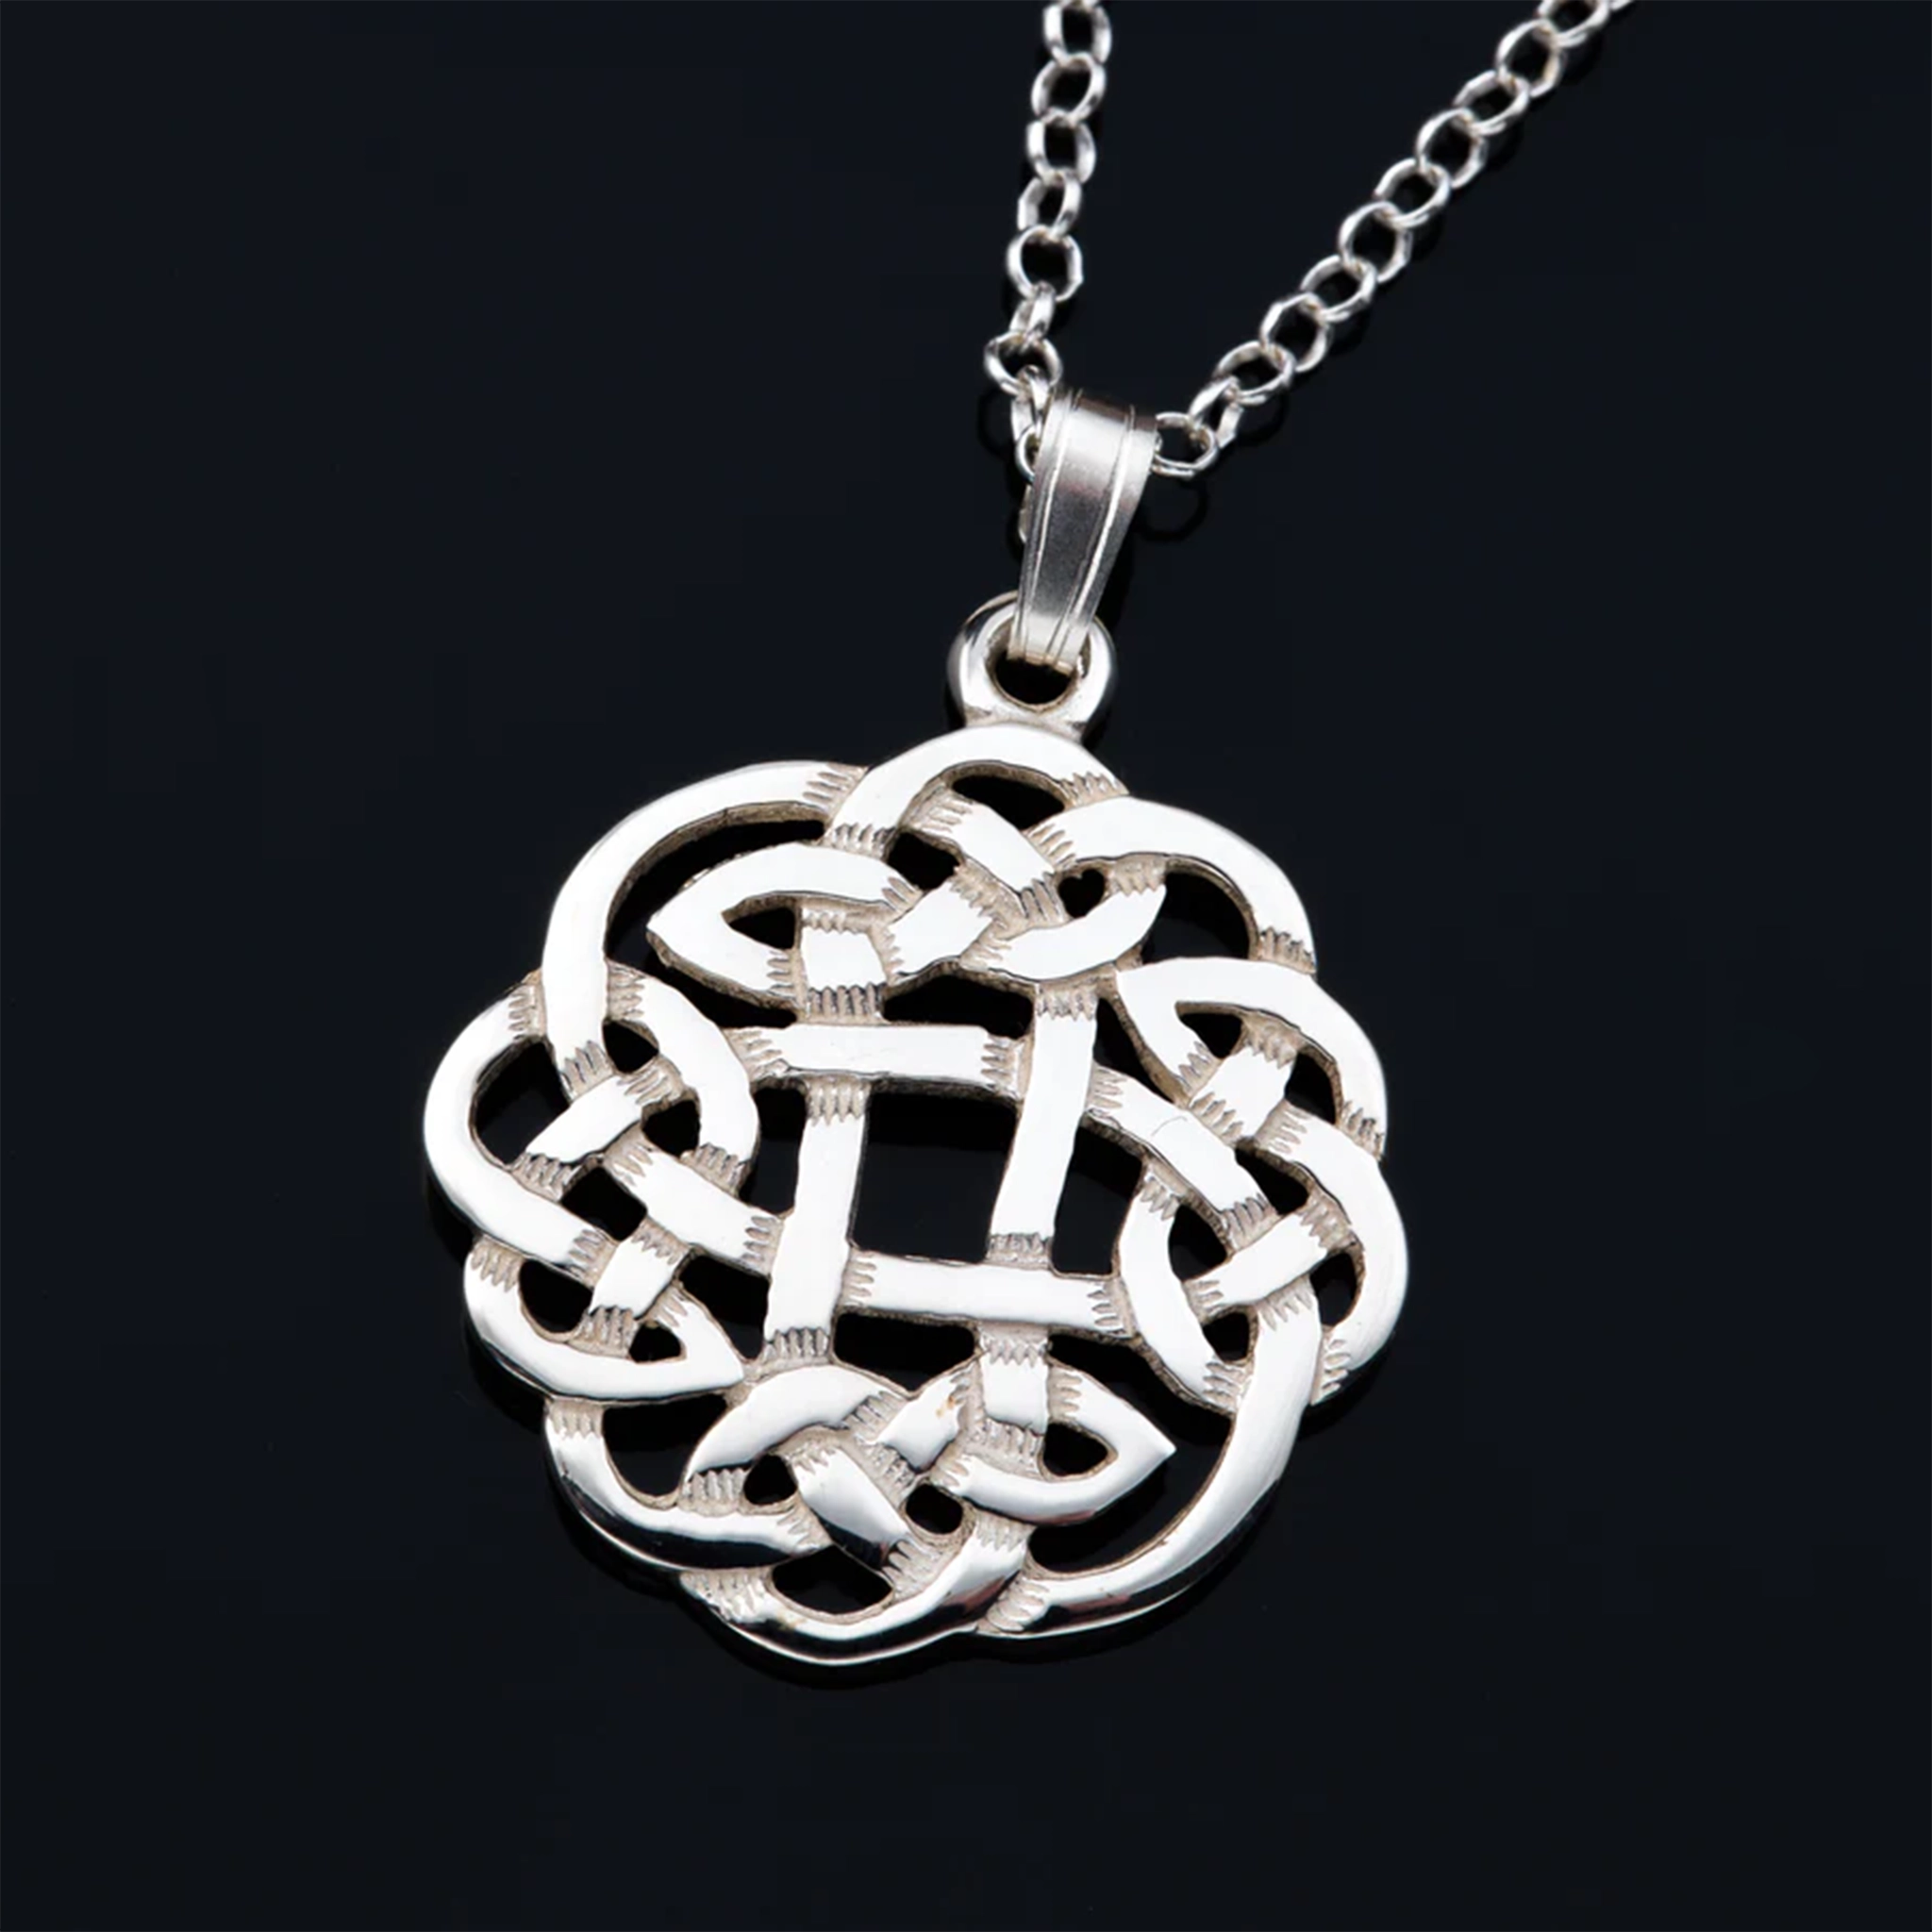 A round Celtic weave knot silver pendant on a silver mini bell chain